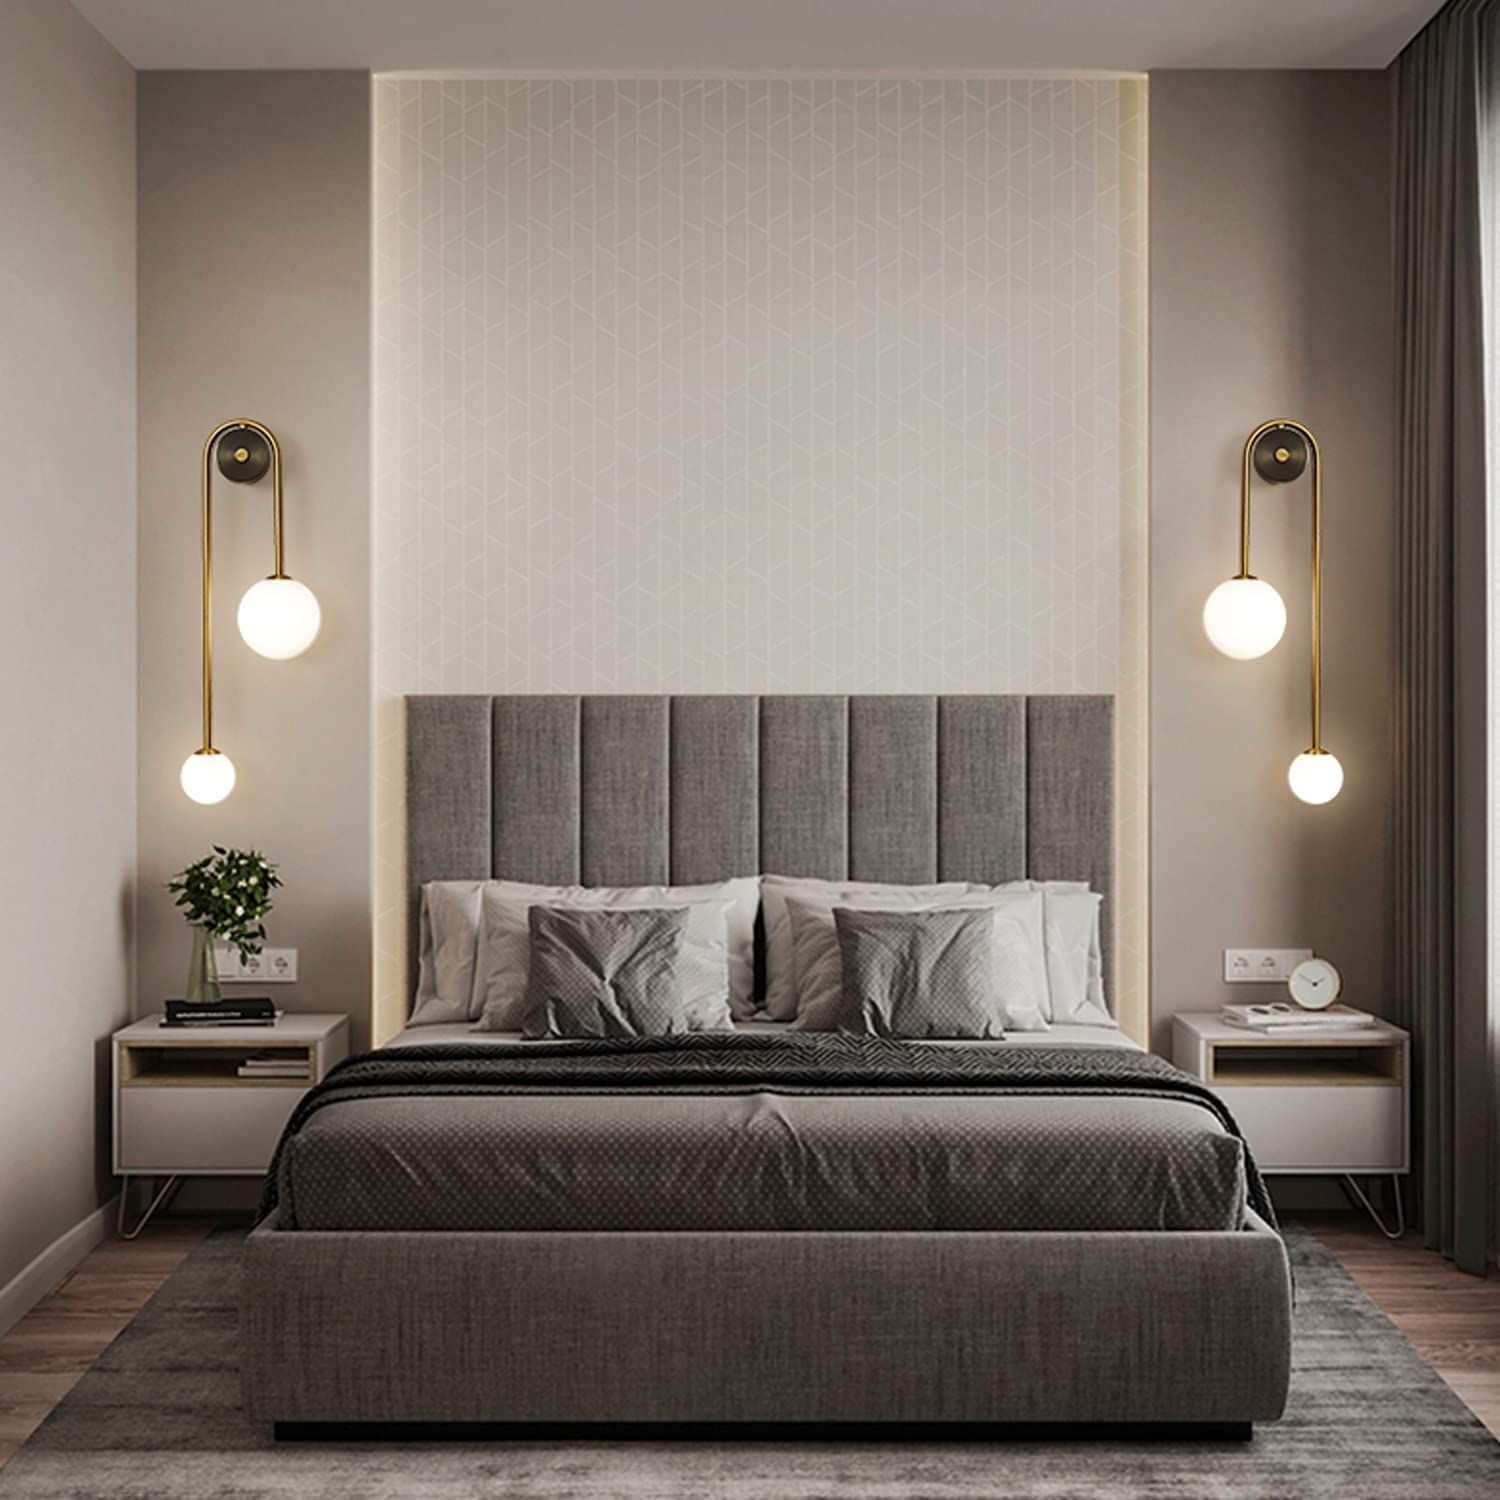 Enhancing Your Bedroom with Contemporary Wall Lamps